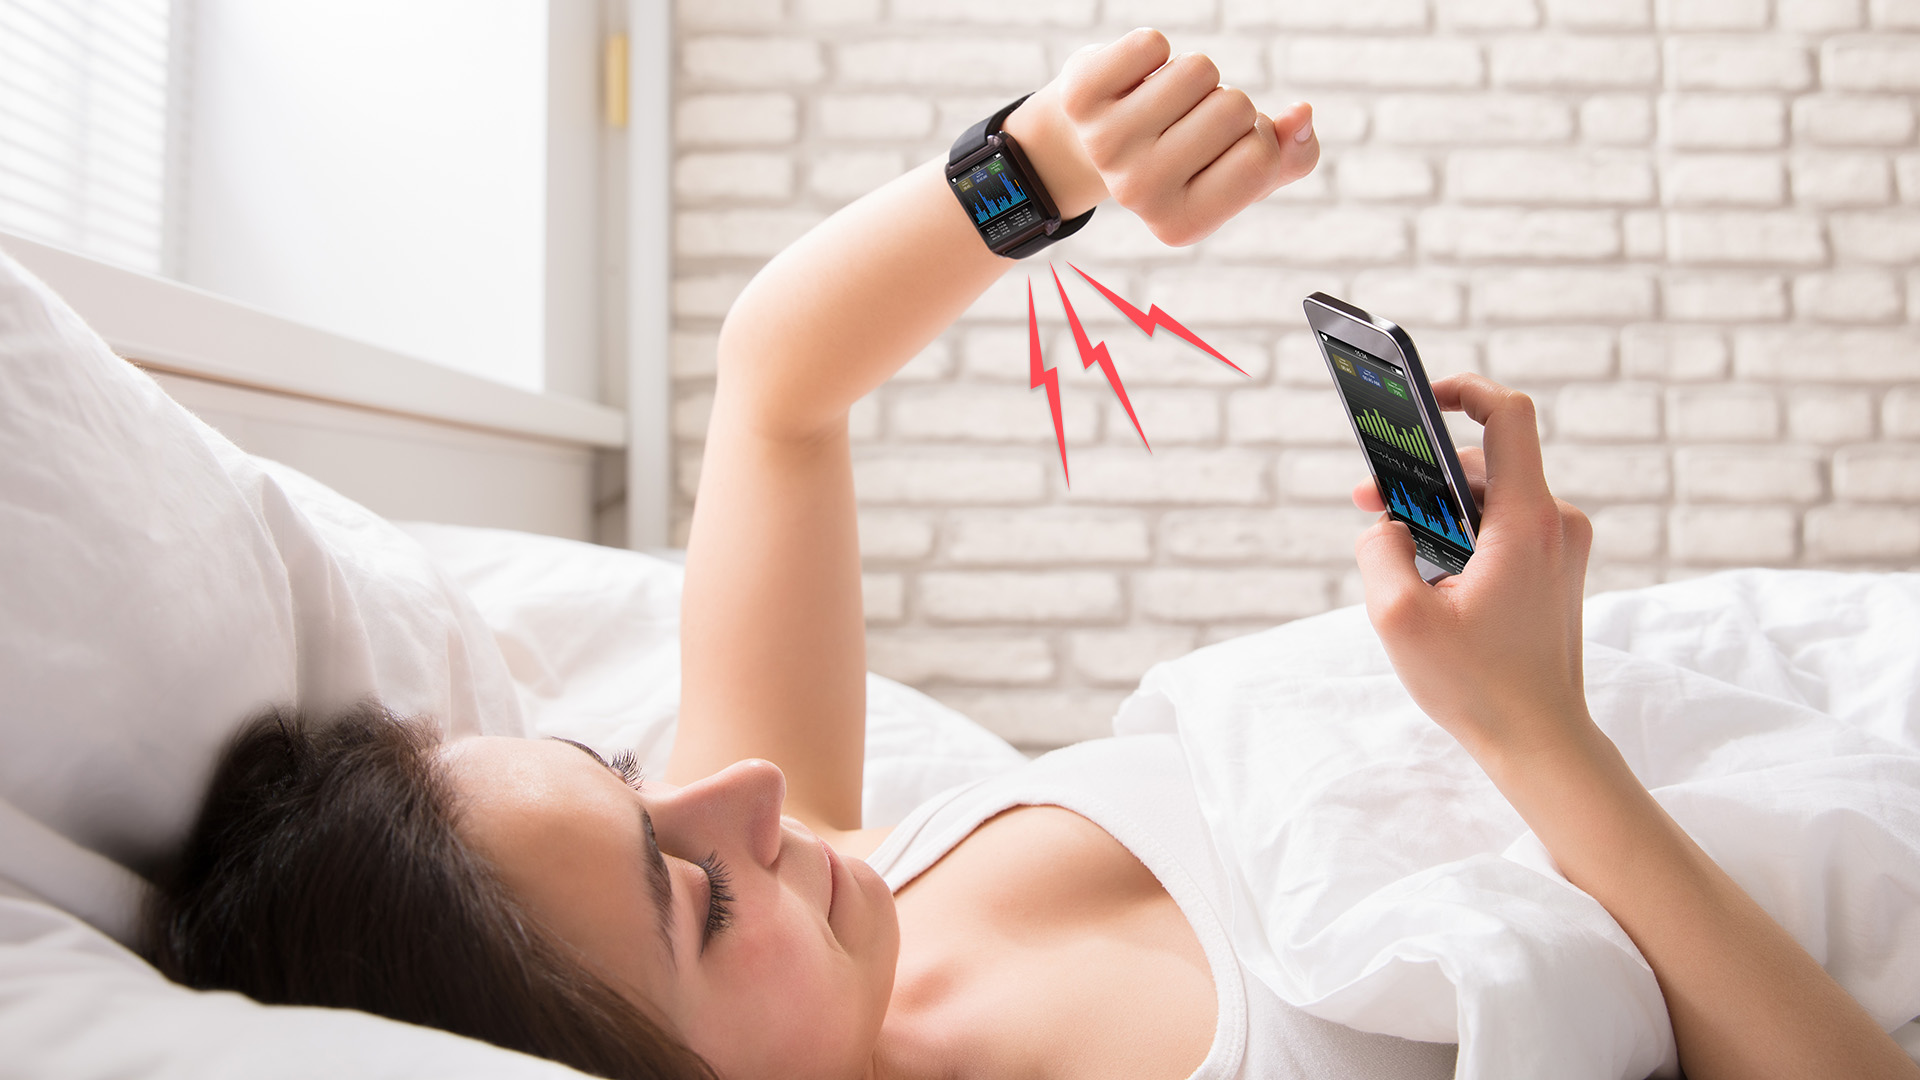 Why I Use an Electric Shock Bracelet to Wake Myself Up, and What the Experts Say